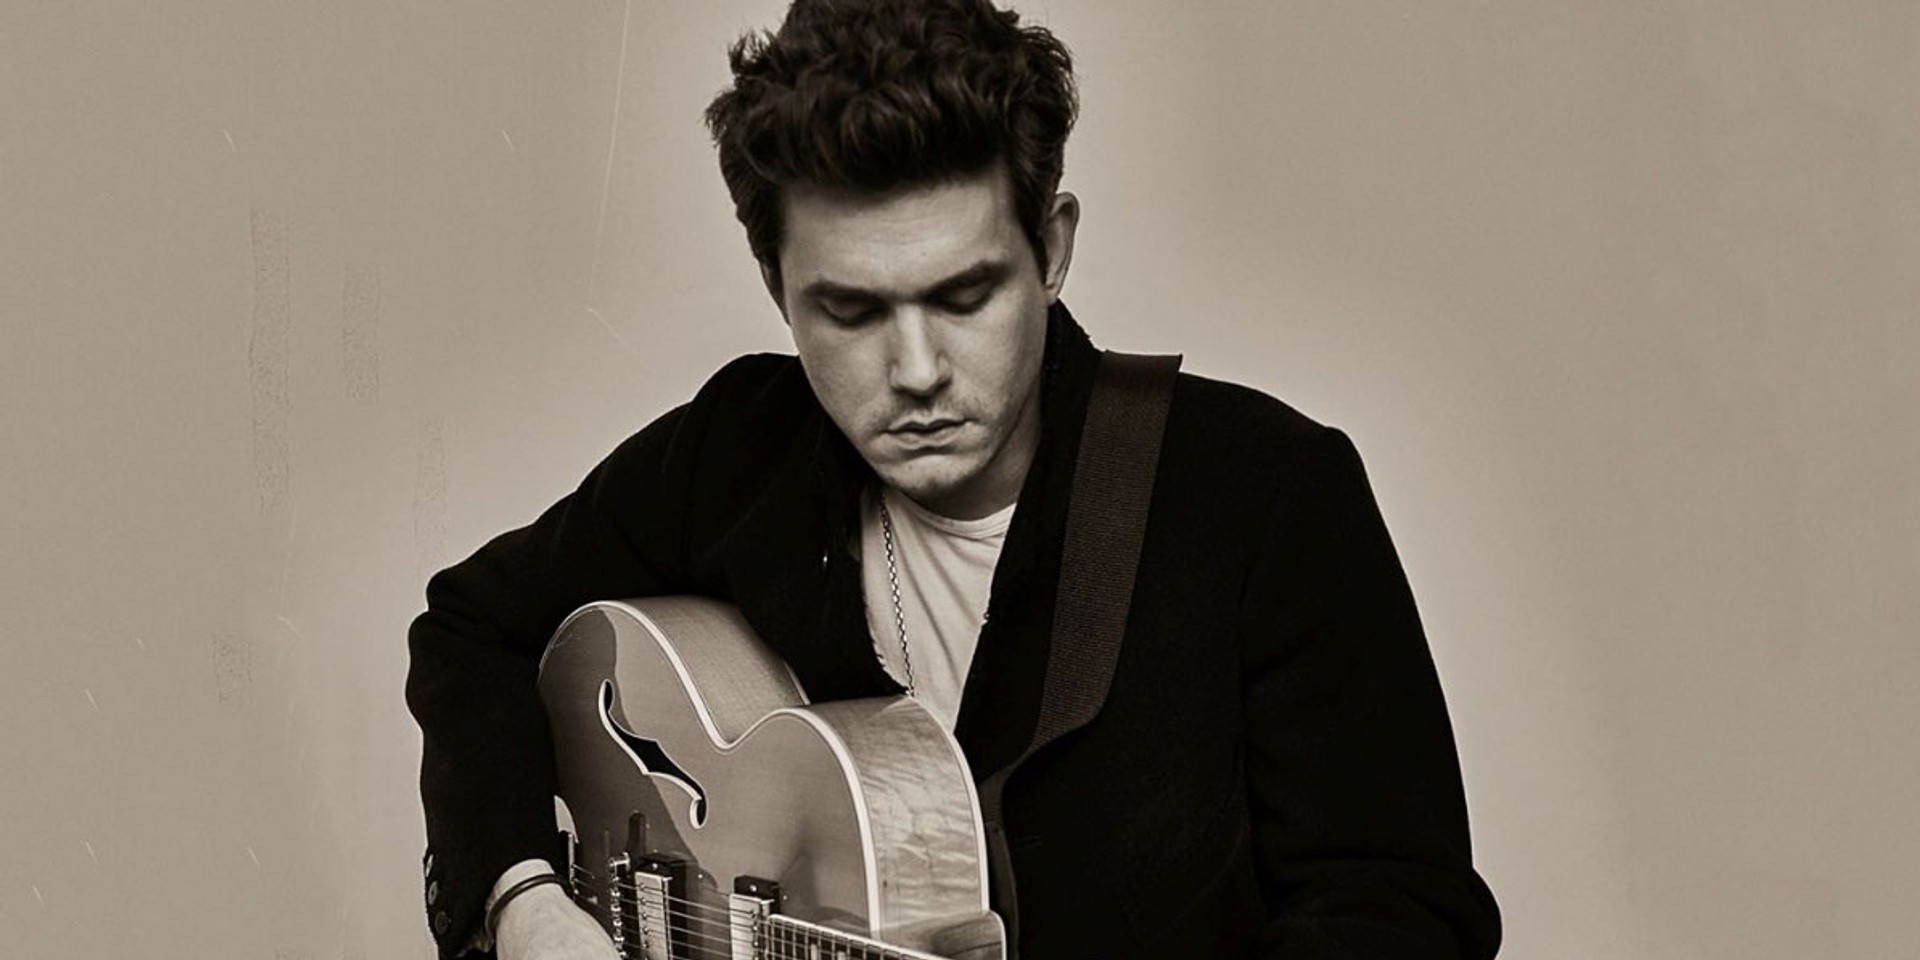 More tickets for John Mayer's concert in Singapore to be released